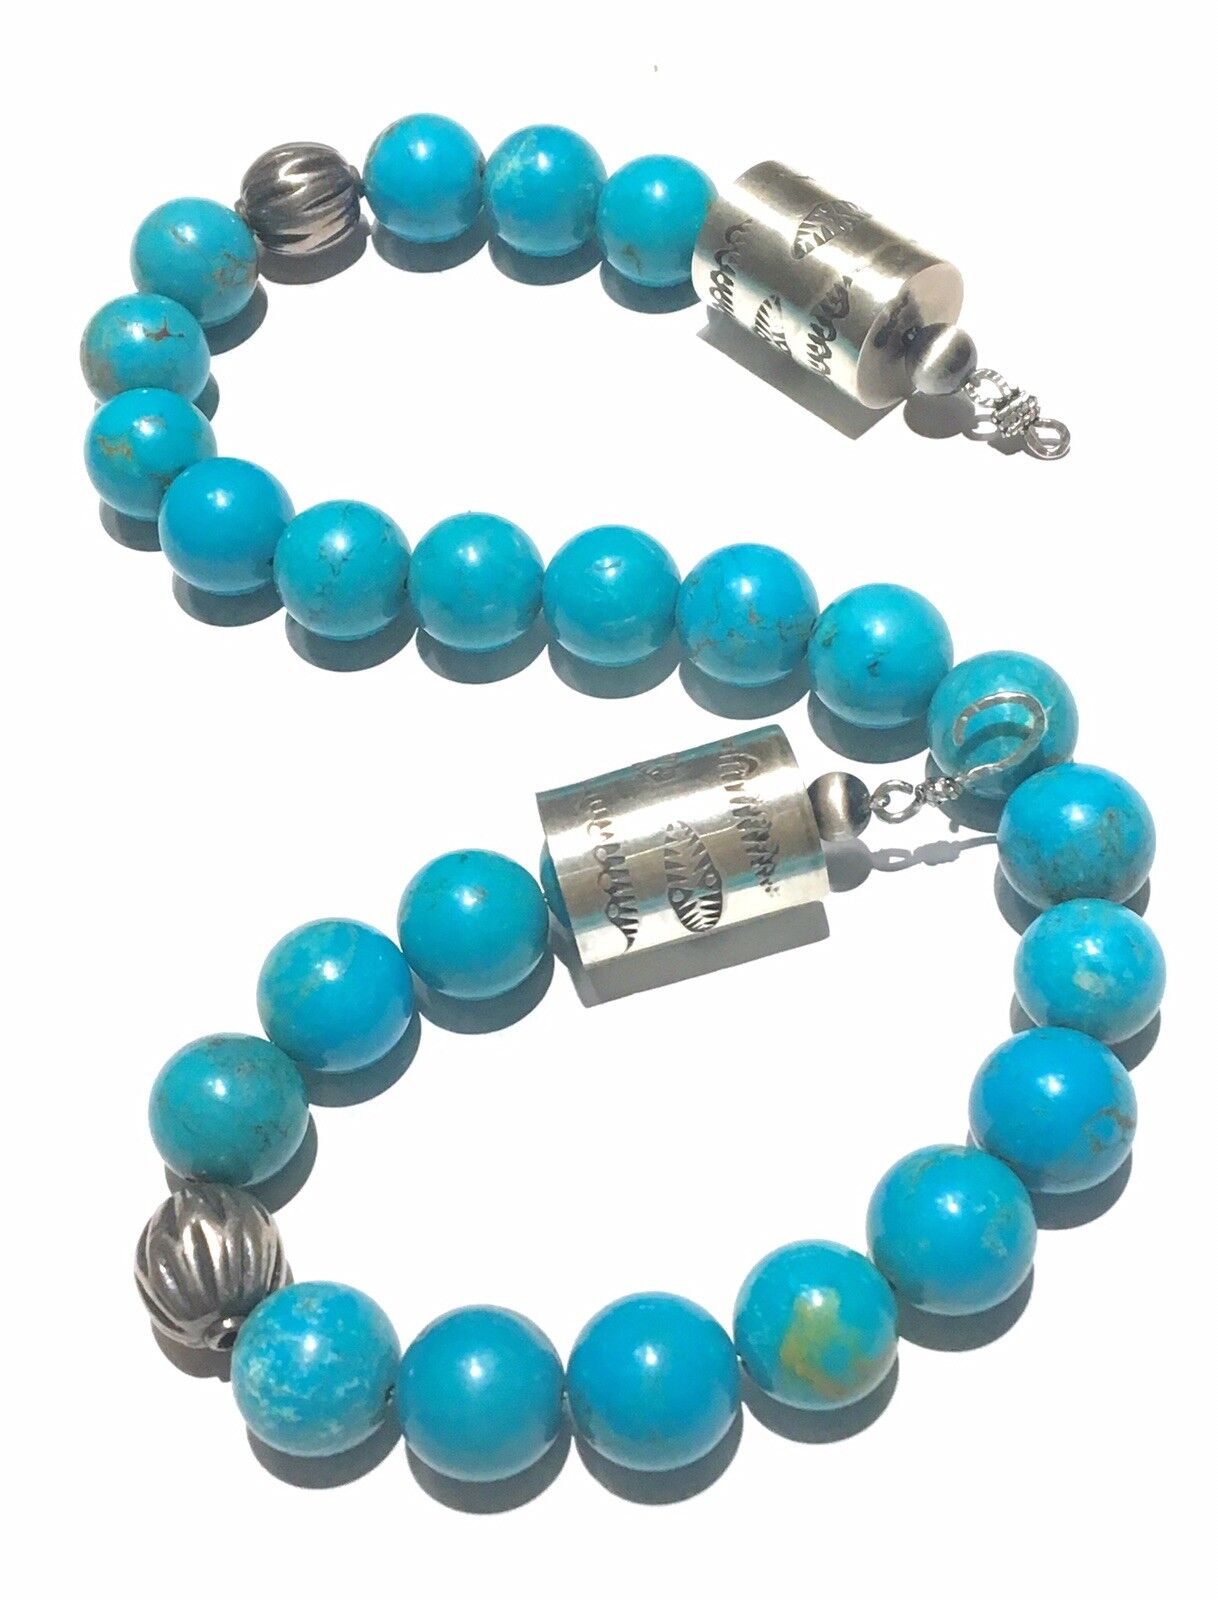 Large Turquoise beads Sterling silver Necklace - image 11